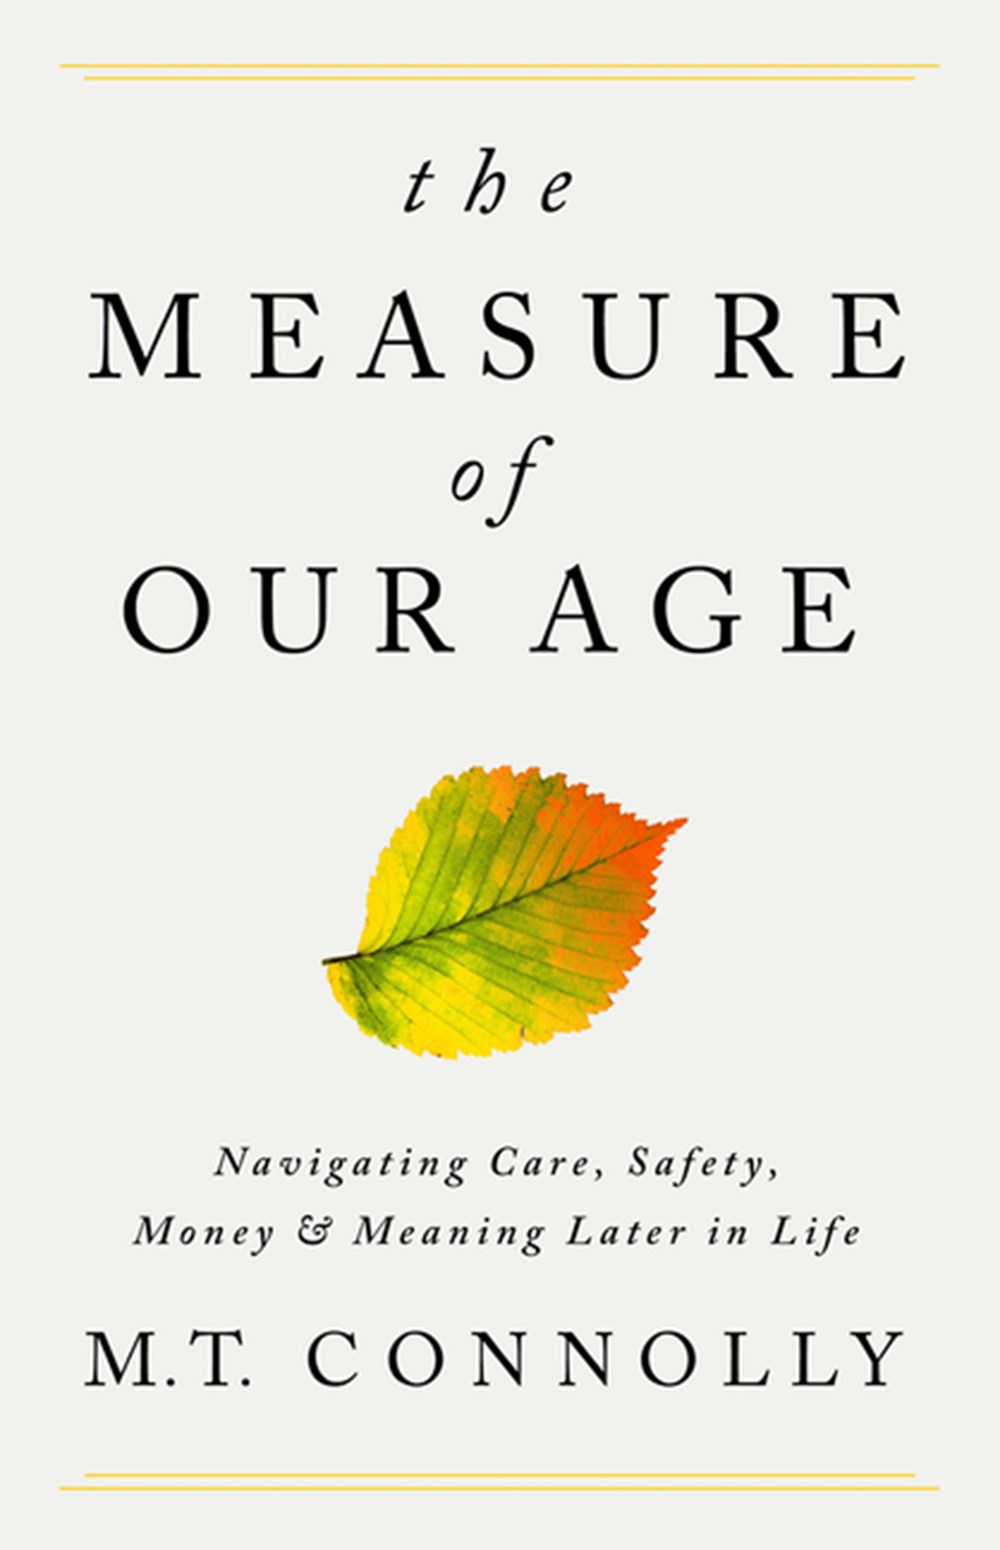 Measure of Our Age: Navigating Care, Safety, Money, and Meaning Later in Life